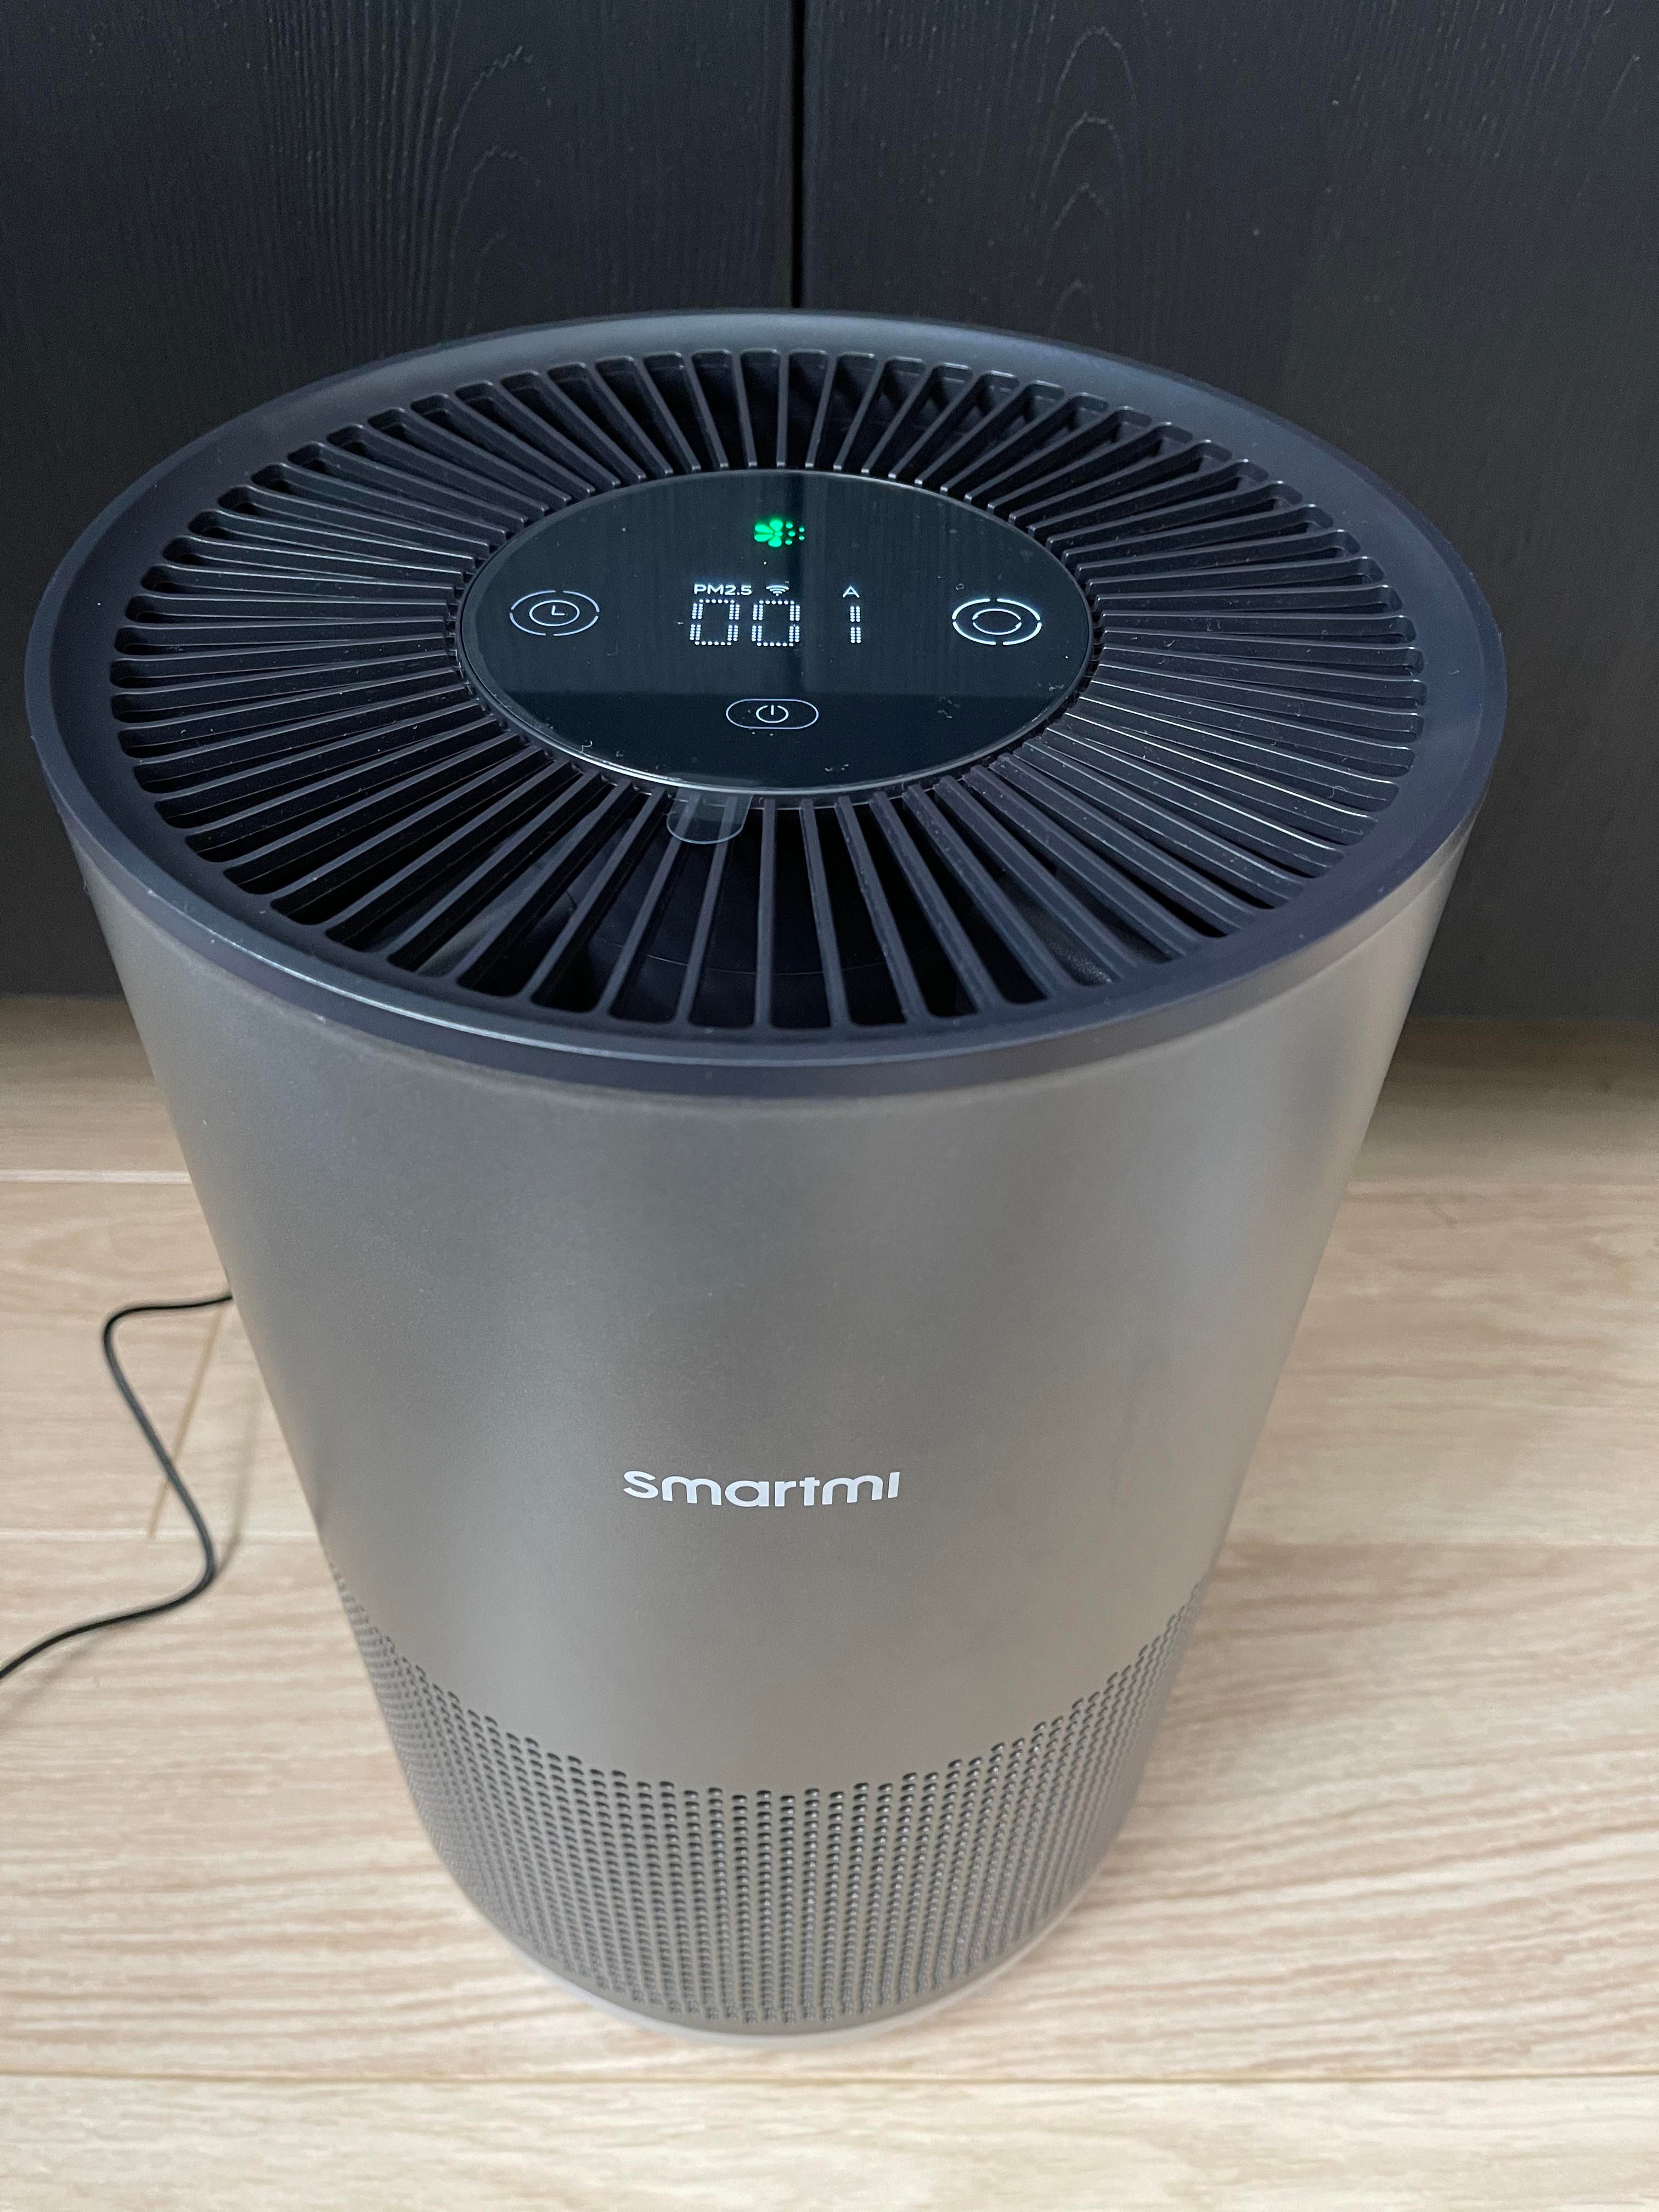 Today I received the Smartmi P1 air purifier with HomeKit